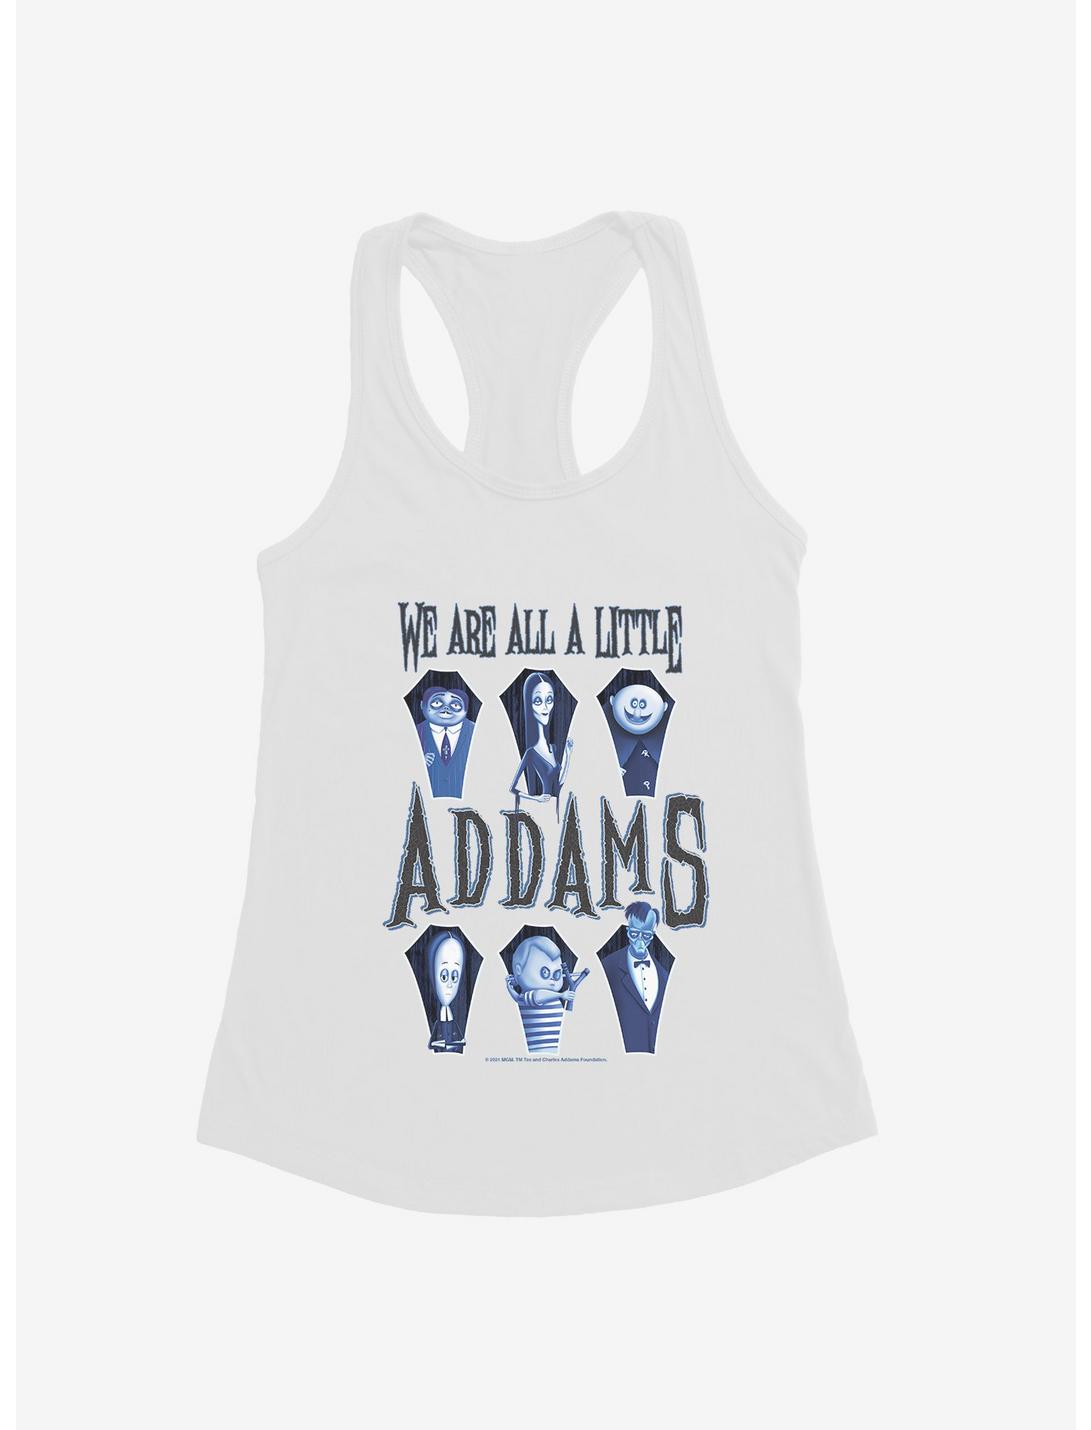 The Addams Family 2 We Are Addams Girls Tank, , hi-res